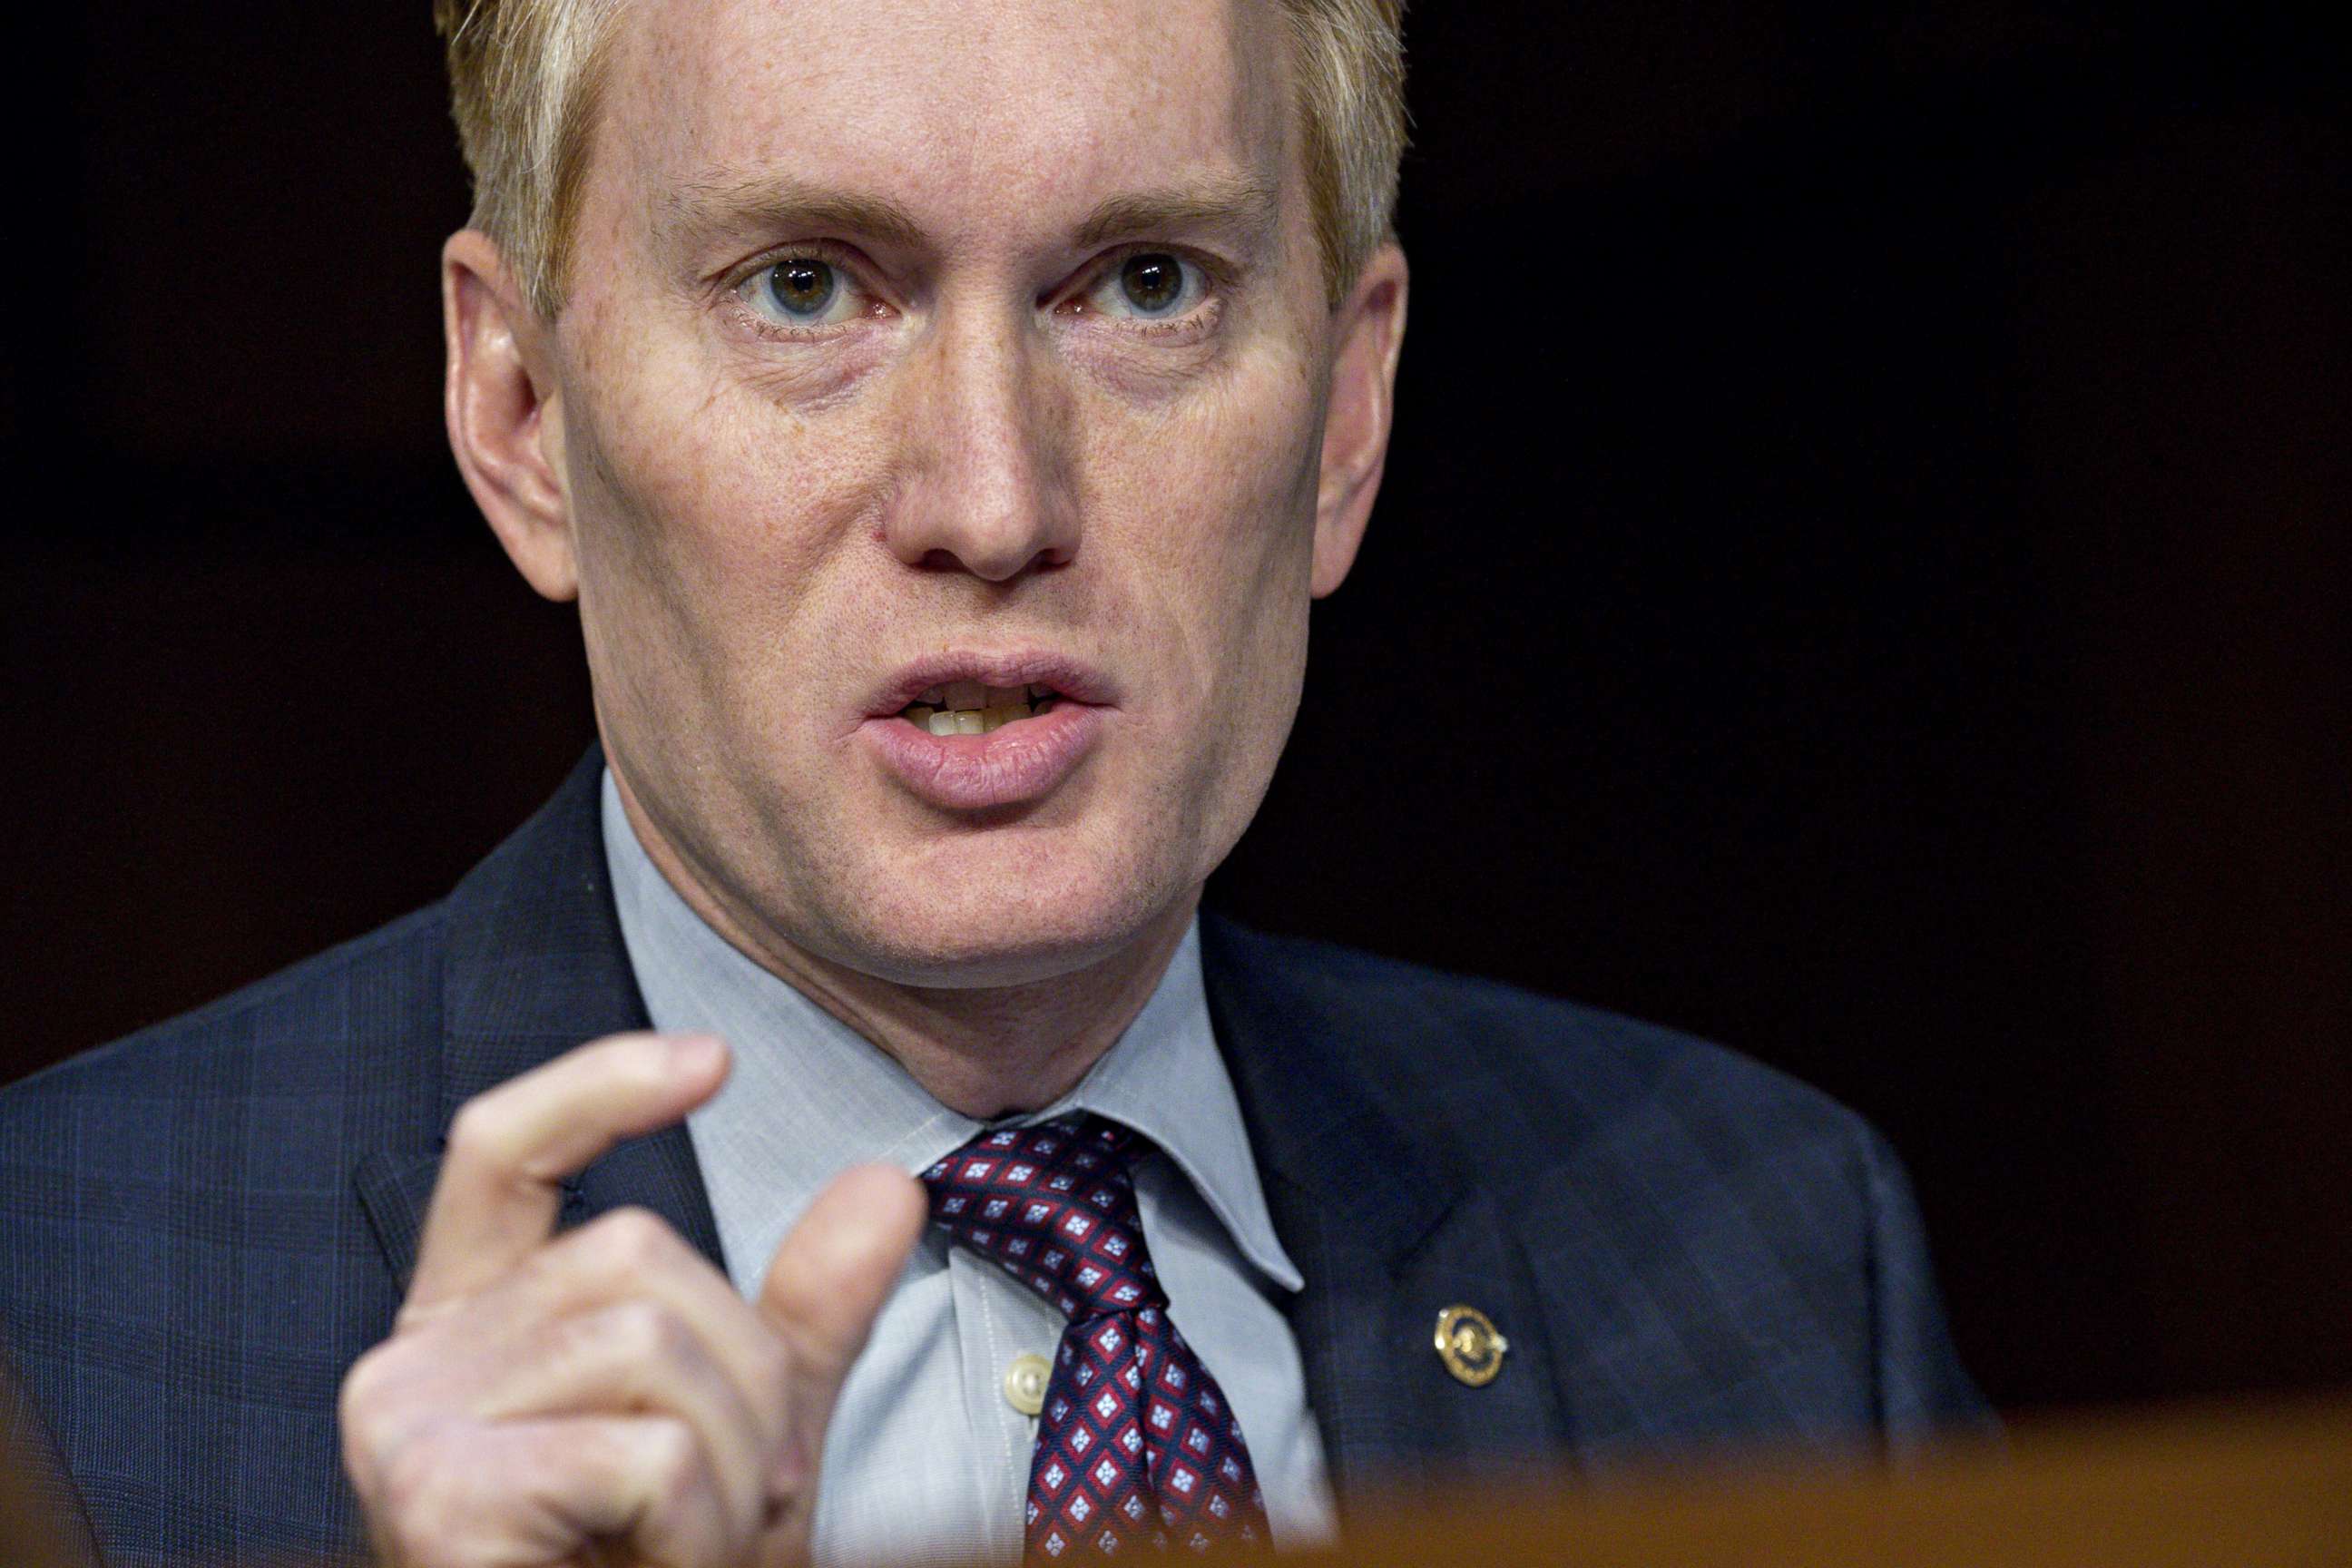 PHOTO: Senator James Lankford, a Republican from Oklahoma, questions witnesses during a Senate Intelligence Committee hearing in Washington, Nov. 1, 2017.